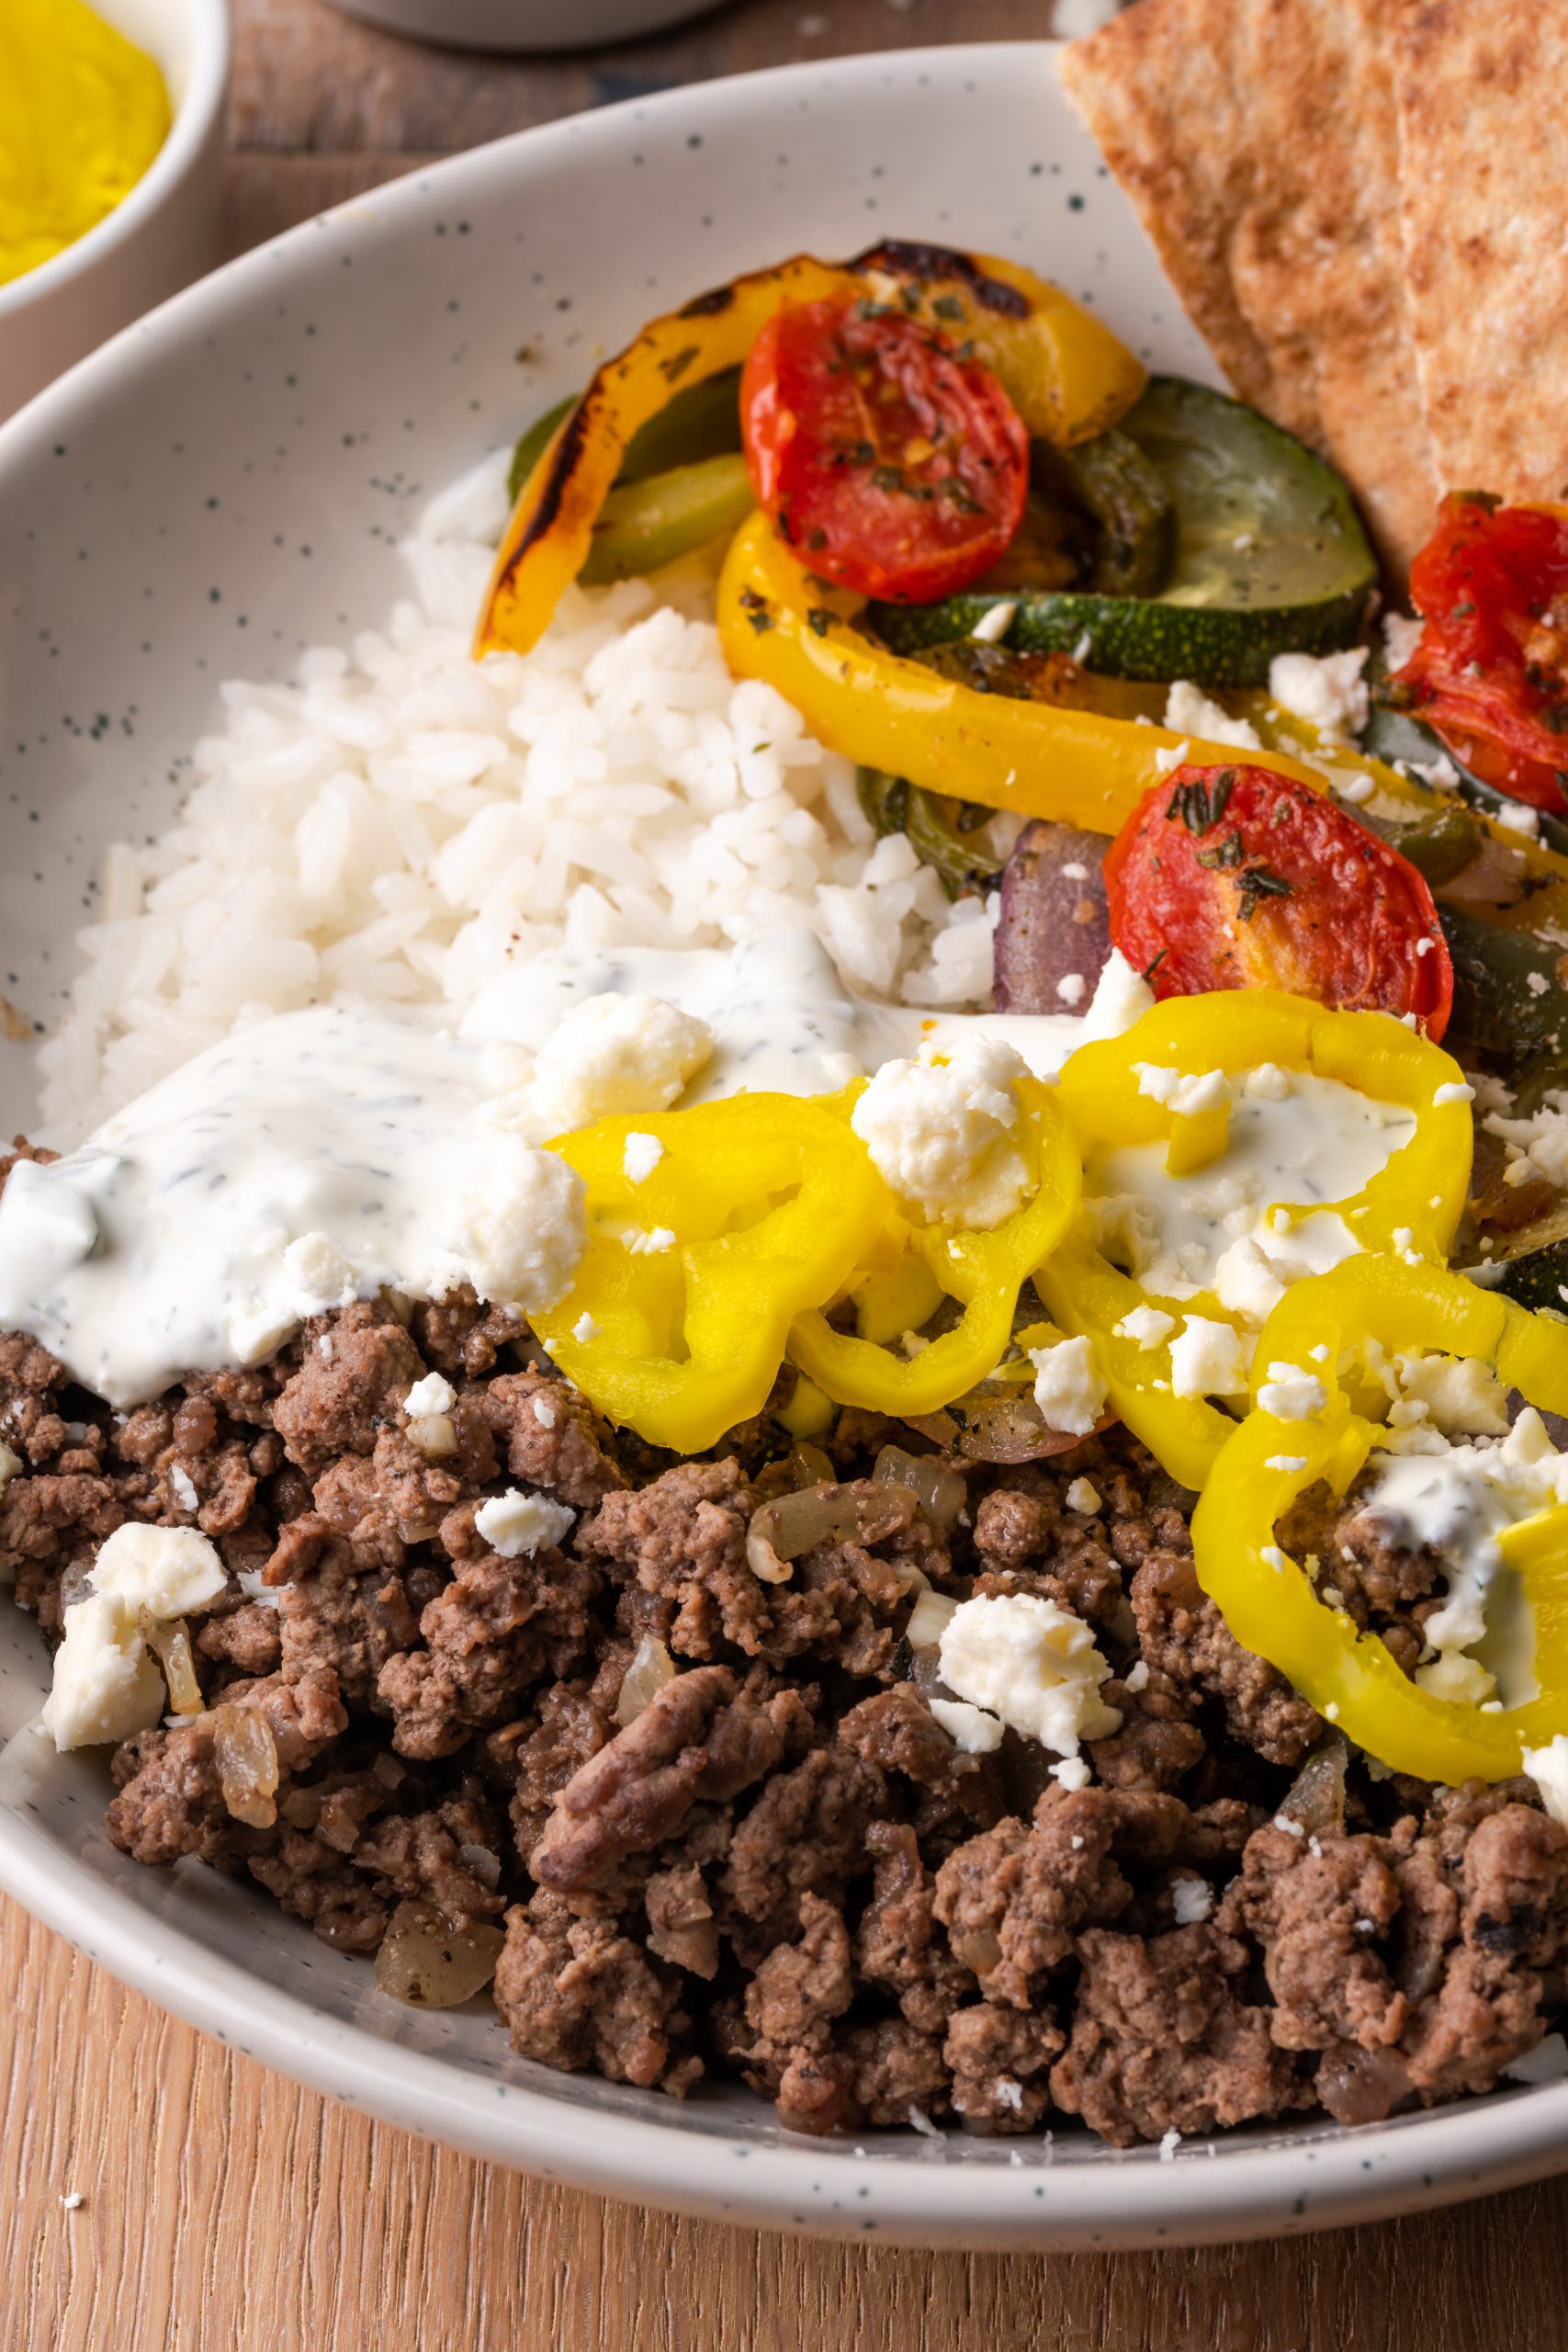 Bowl with rice, ground beef gyro meat, banana peppers, feta cheese, and roasted veggies.